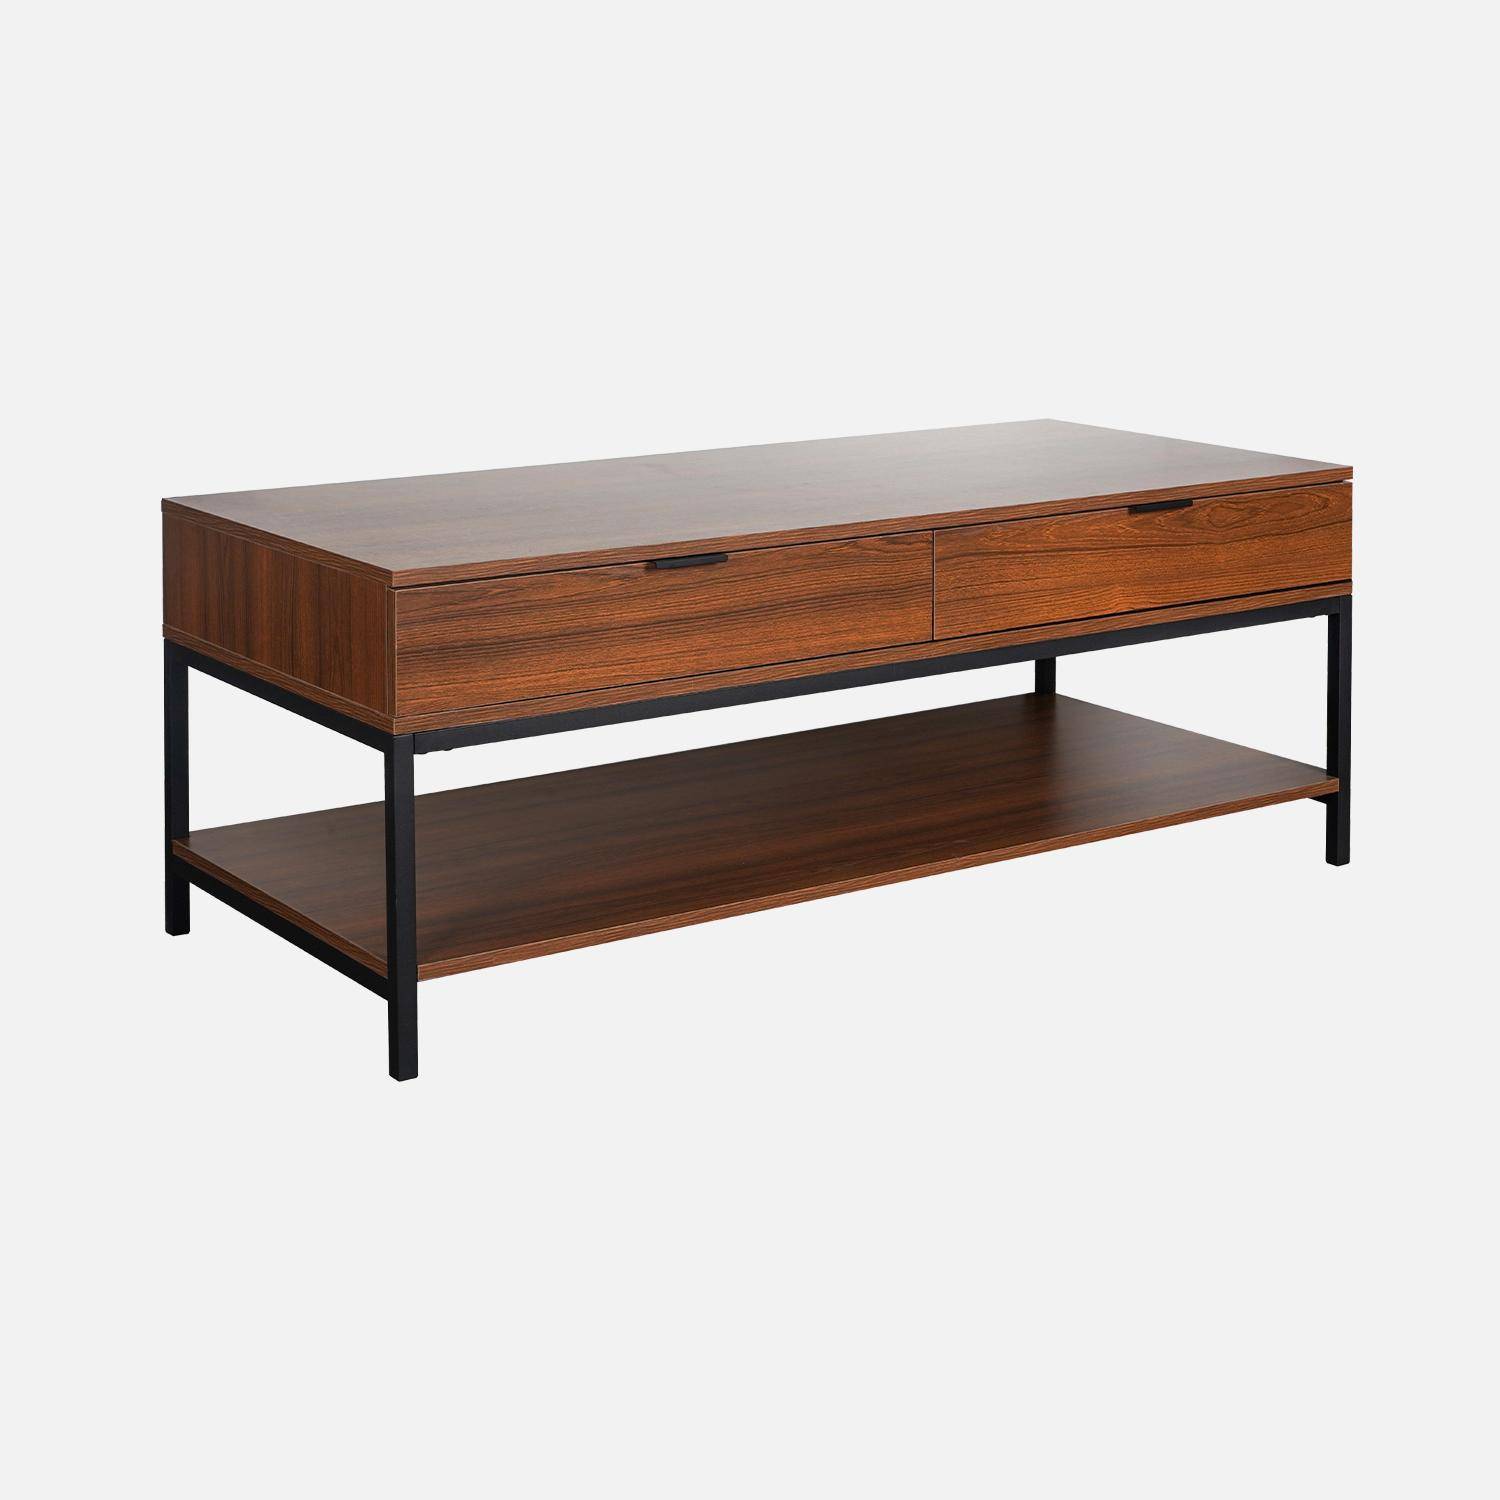 Walnut-coloured coffee table with black metal legs and handle - 2 drawers and 1 shelf Photo1